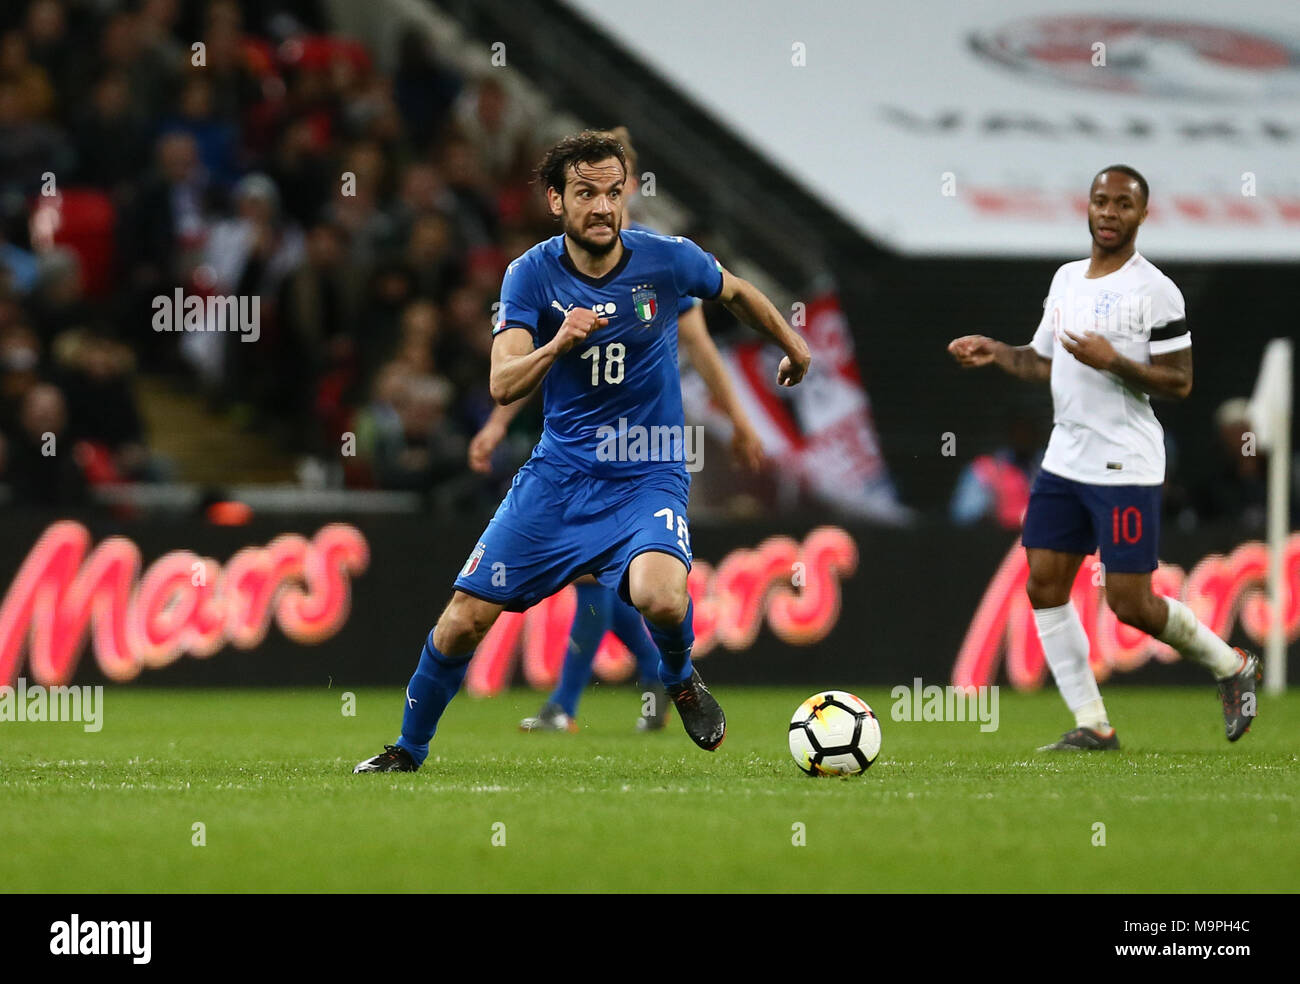 London, UK. 27th March, 2018. Marco Parolo of Italy during the International Friendly match between England and Italy at Wembley Stadium on March 27th 2018 in London, England. (Photo by Leila Coker/phcimages.com) Credit: PHC Images/Alamy Live News Stock Photo